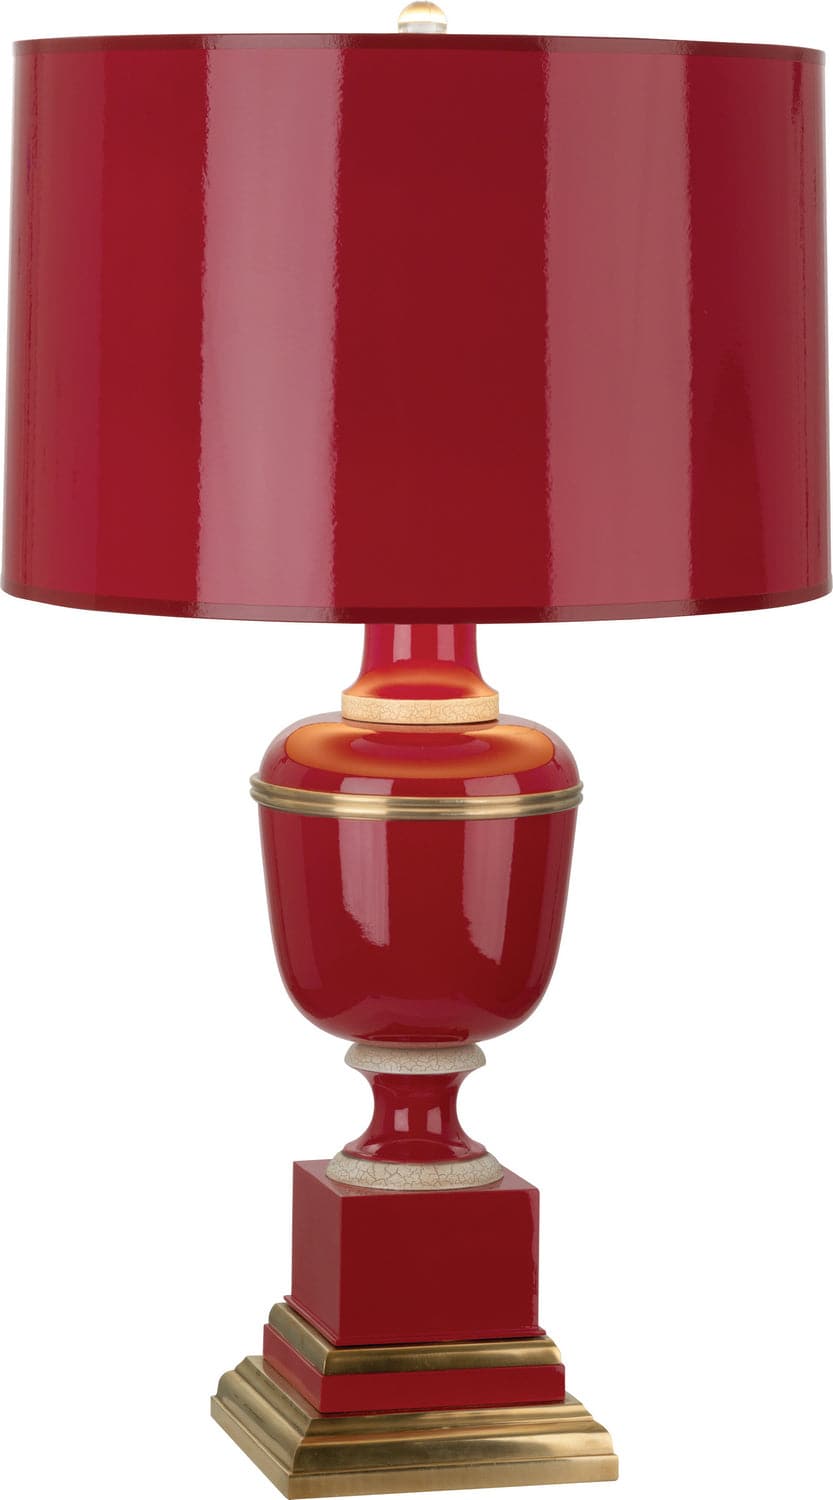 Robert Abbey - 2505 - One Light Accent Lamp - Annika - Red Lacquered Paint and Natural Brass w/Ivory Crackle